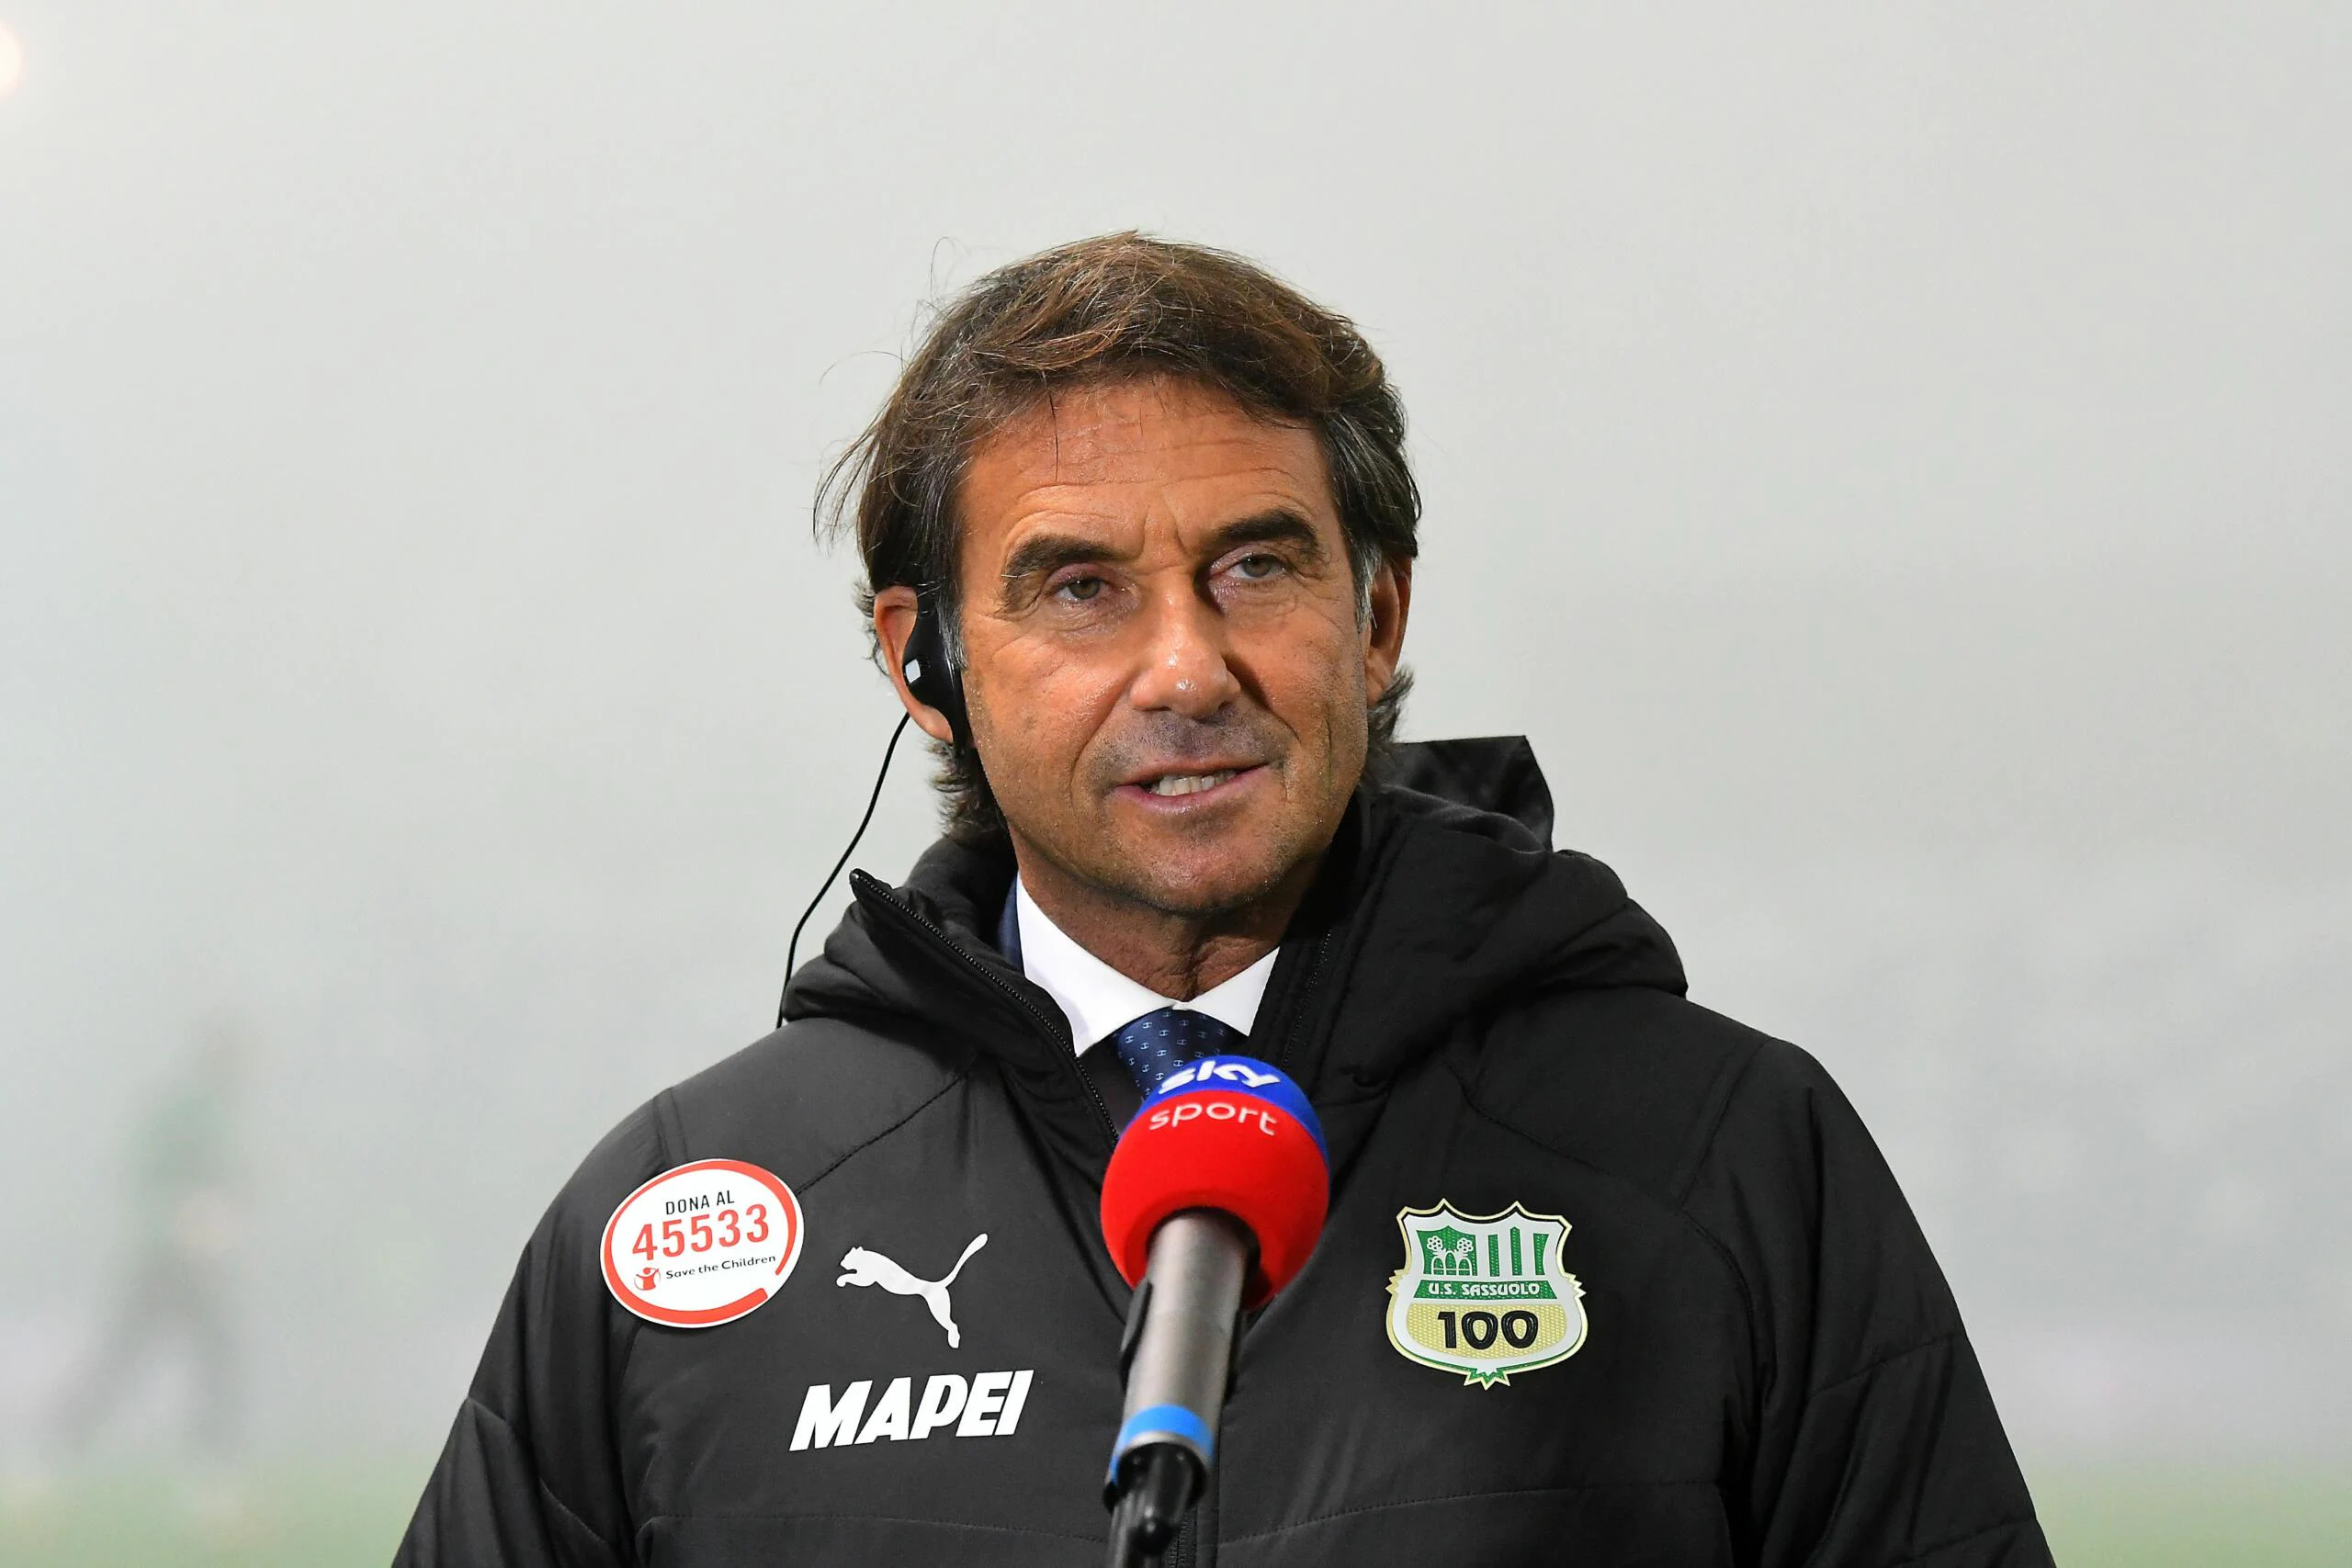 Sassuolo exec Giovanni Carnevali attended the opening ceremony for the start of the transfer market in Rimini and addressed the chatter on their talents.